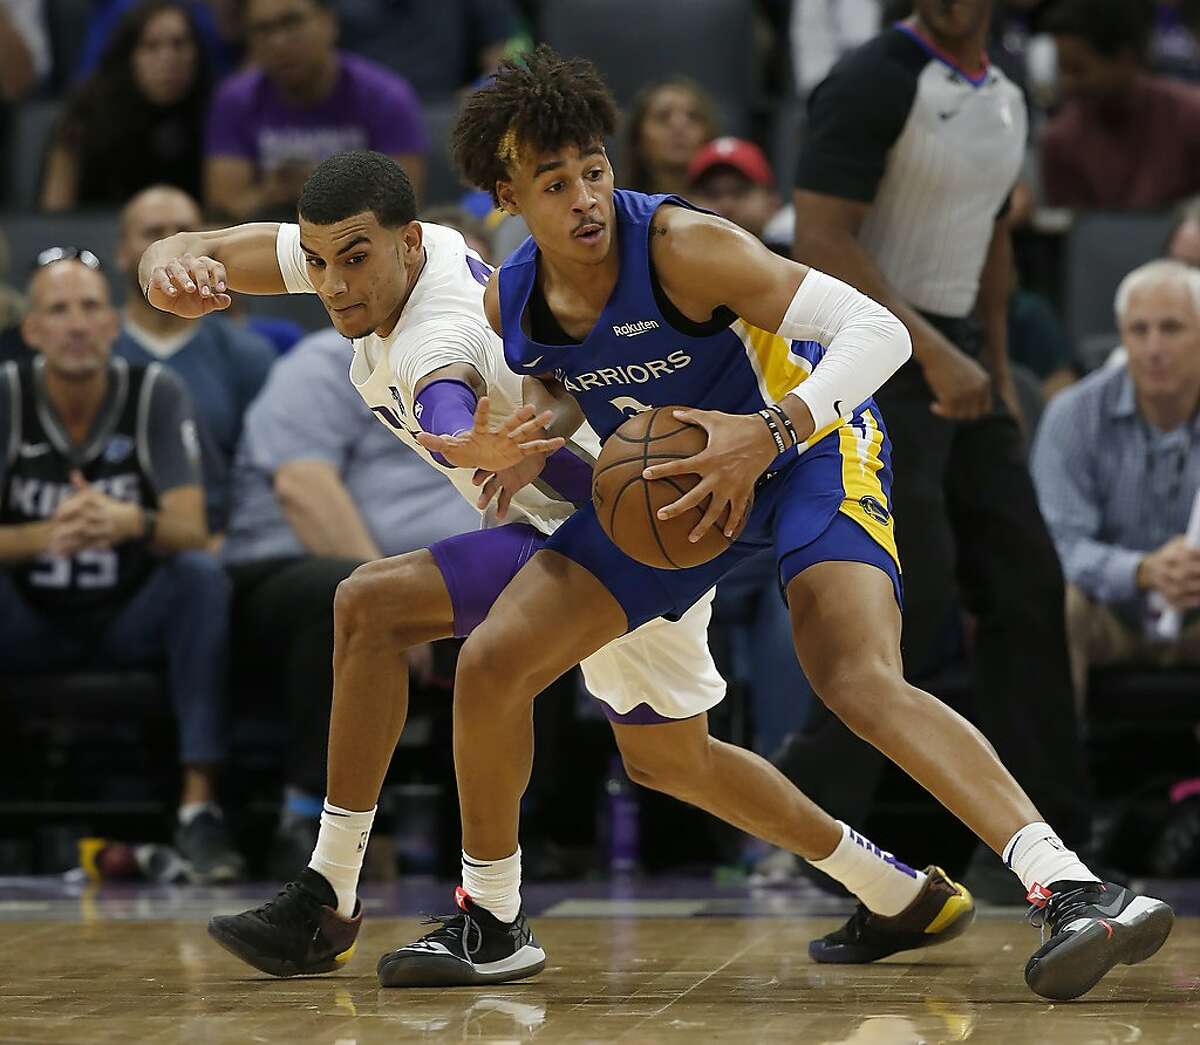 Sacramento Kings guard Justin James, left, tries to steal the ball from Golden State Warriors guard Jordan Poole during the first half of an NBA basketball summer league game in Sacramento, Calif., Monday, July 1, 2019. (AP Photo/Rich Pedroncelli)